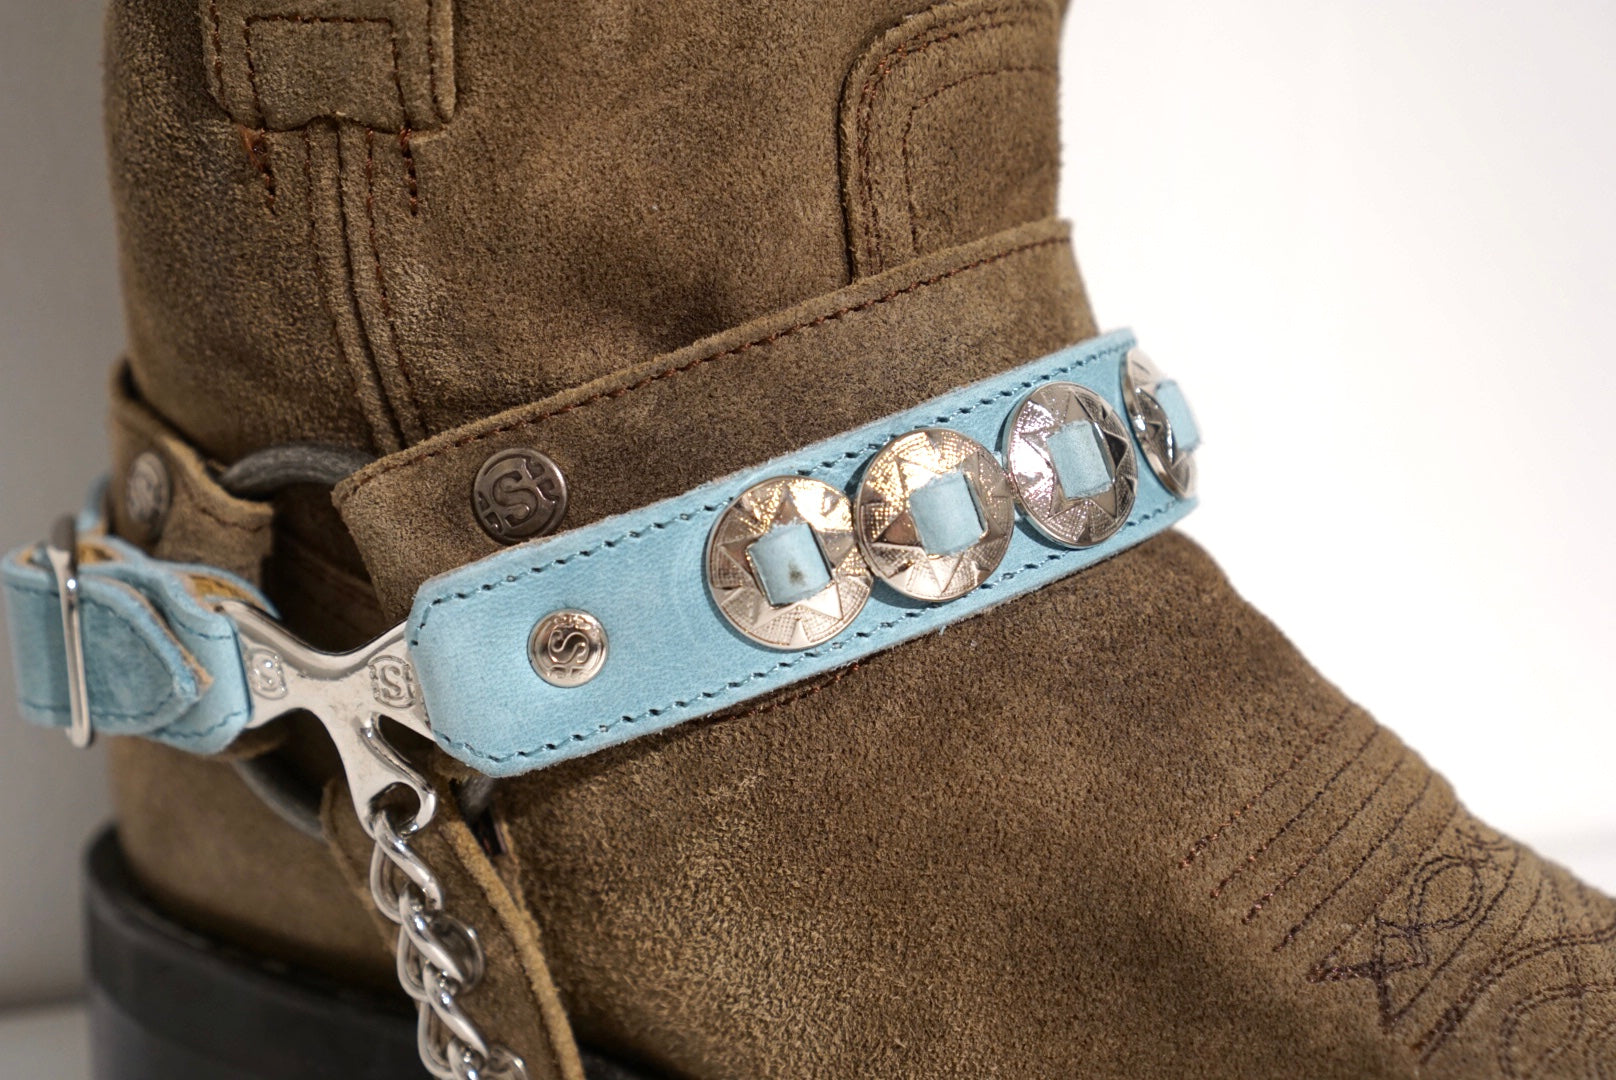 Sendra spurs - light turquoise with silver circles/stars